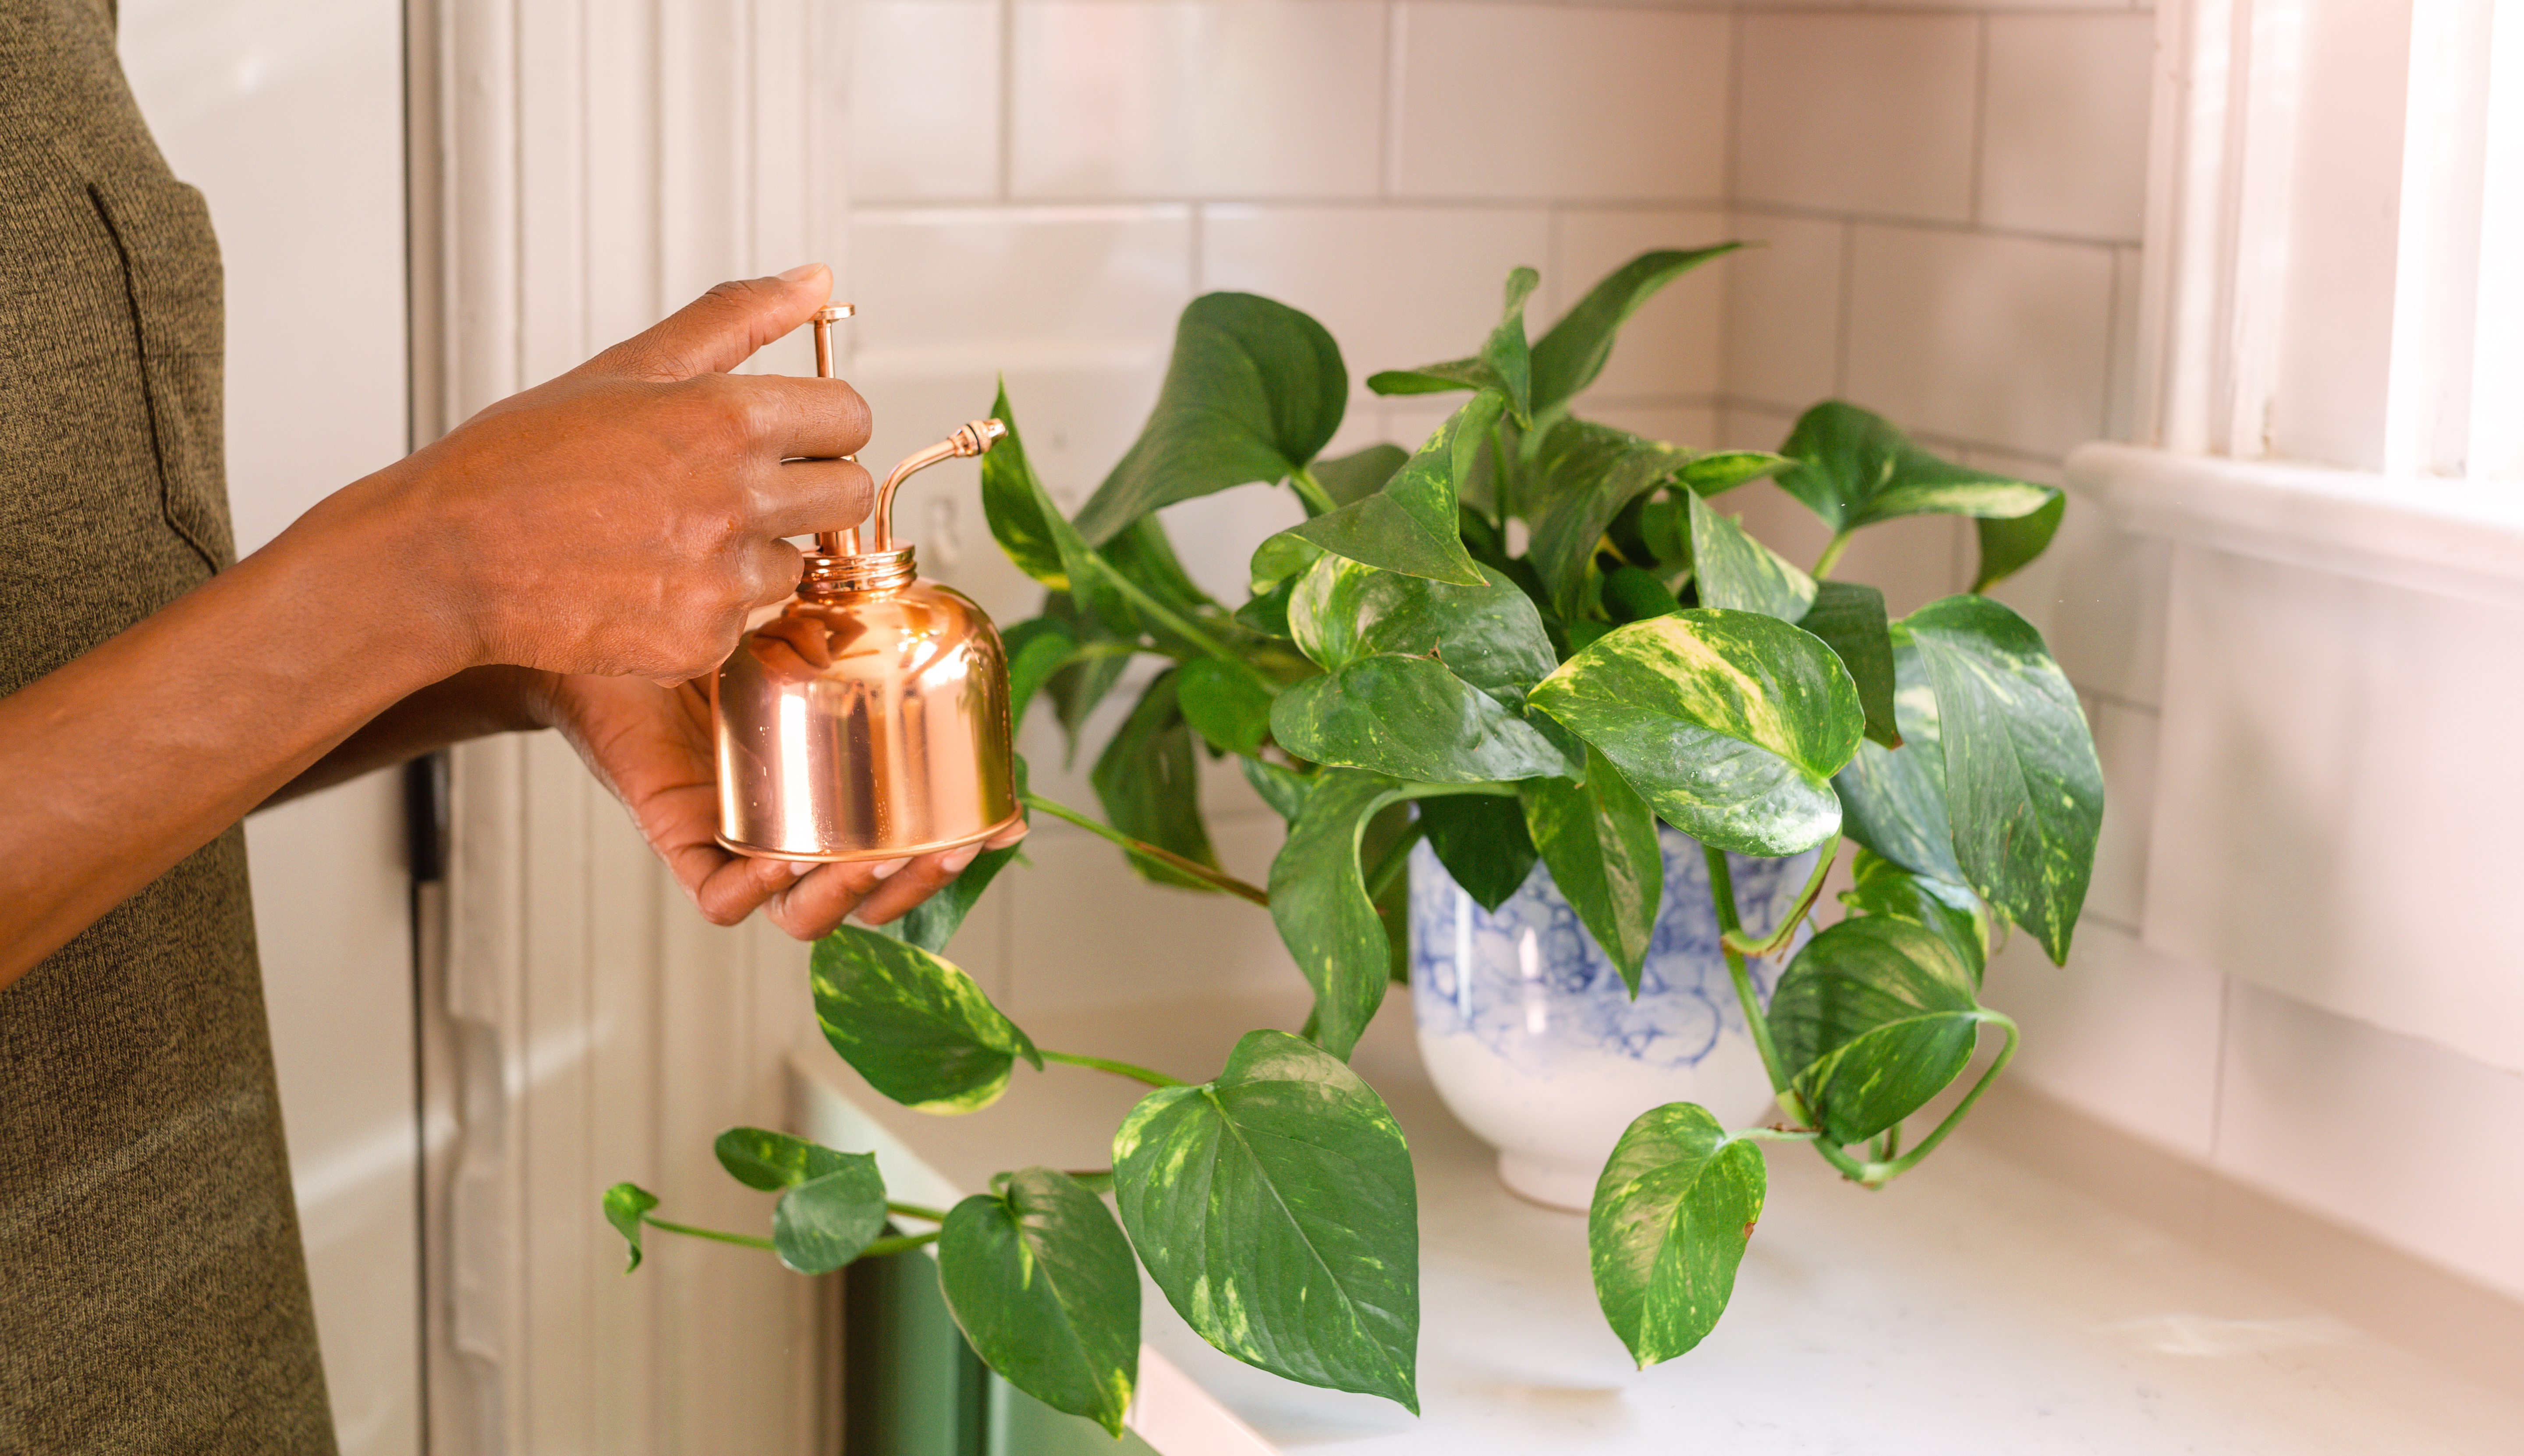 Hands with copper mister misting a pothos plant in a blue and white pot.